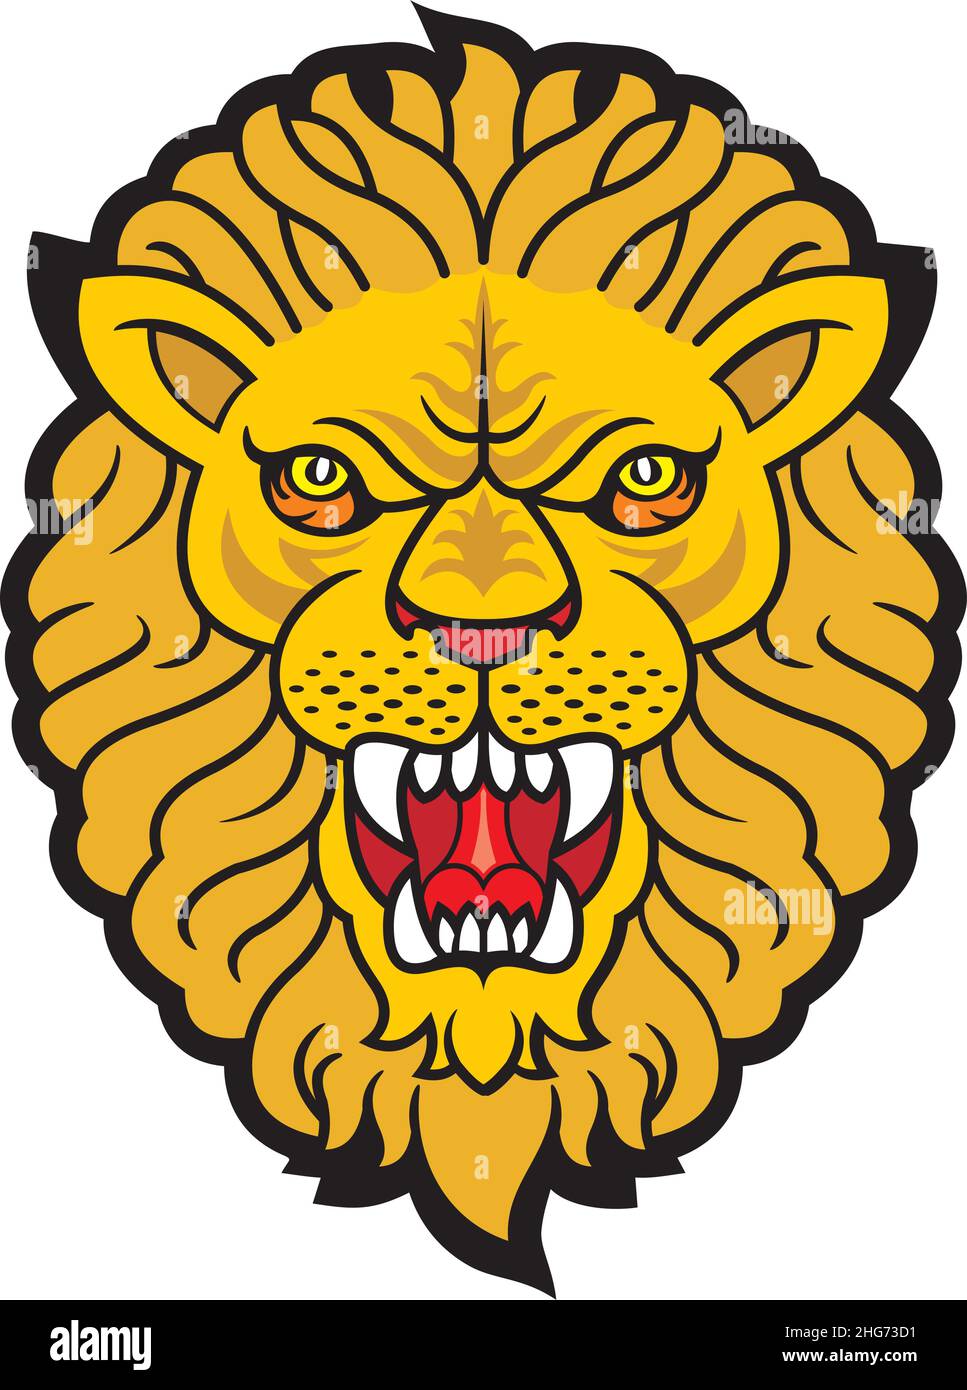 Roaring Angry lion tattoo Stock Vector